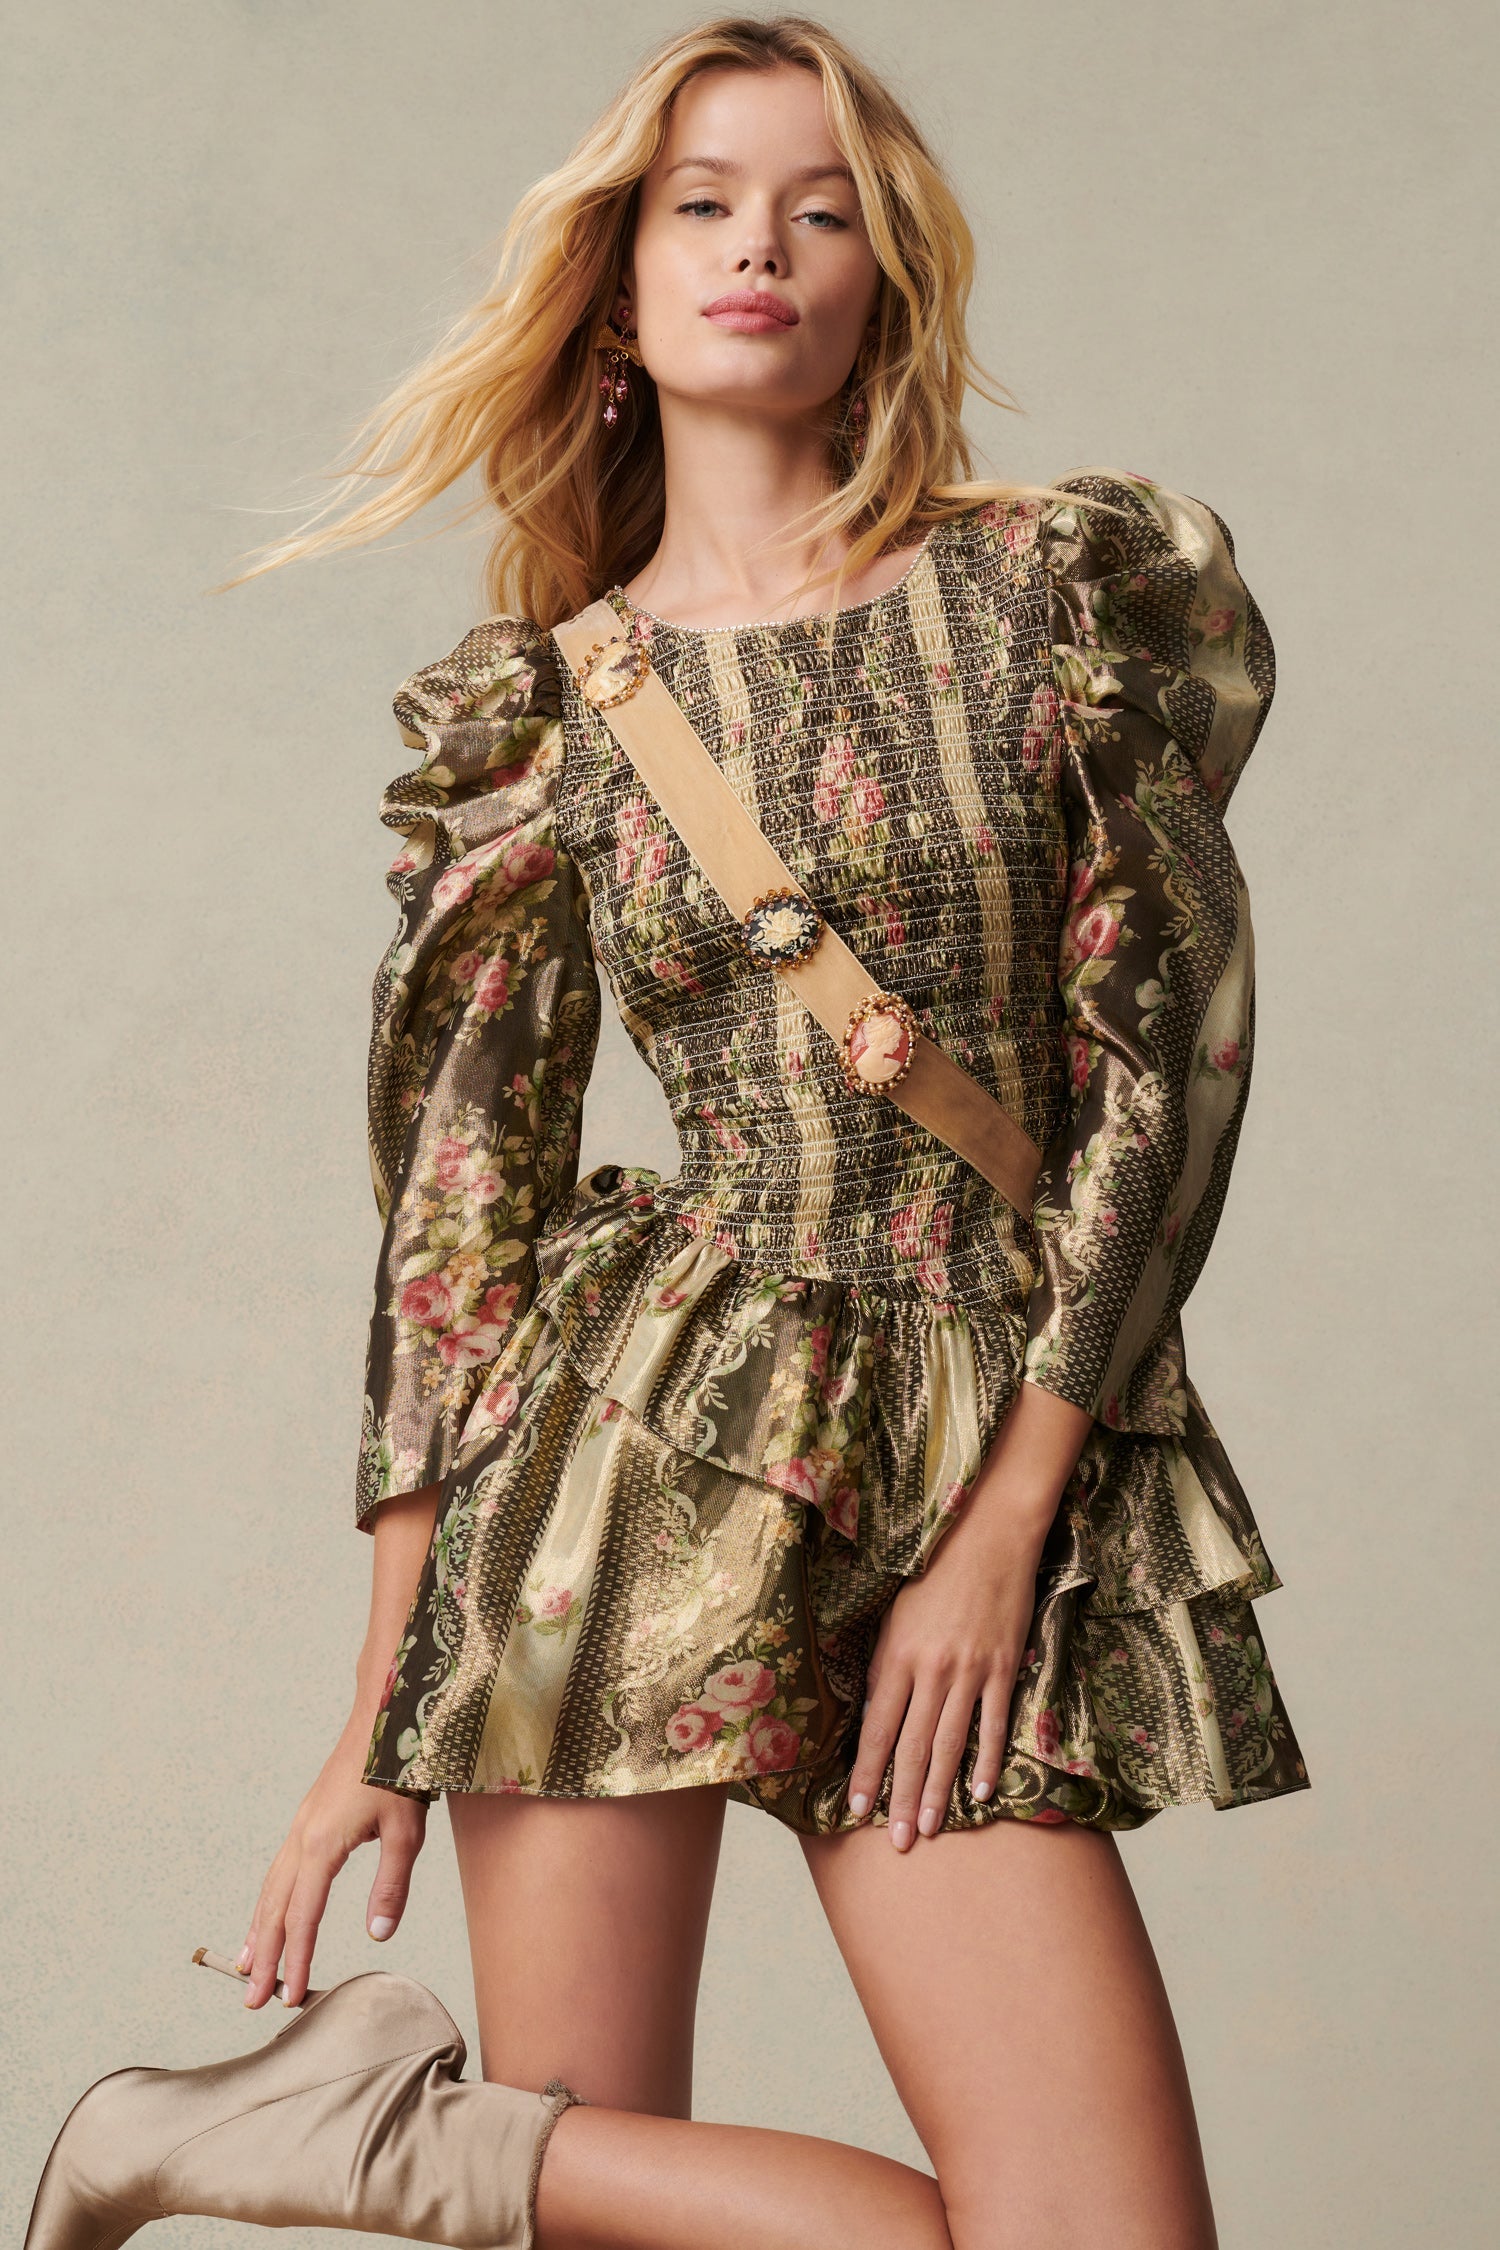 Green and floral mini dress with a printed lurex lame fabric the dress features a smocked bodice, elegant mutton sleeves with shirring at the shoulders that taper into a clean opening, and an asymmetrically tiered skirt. 